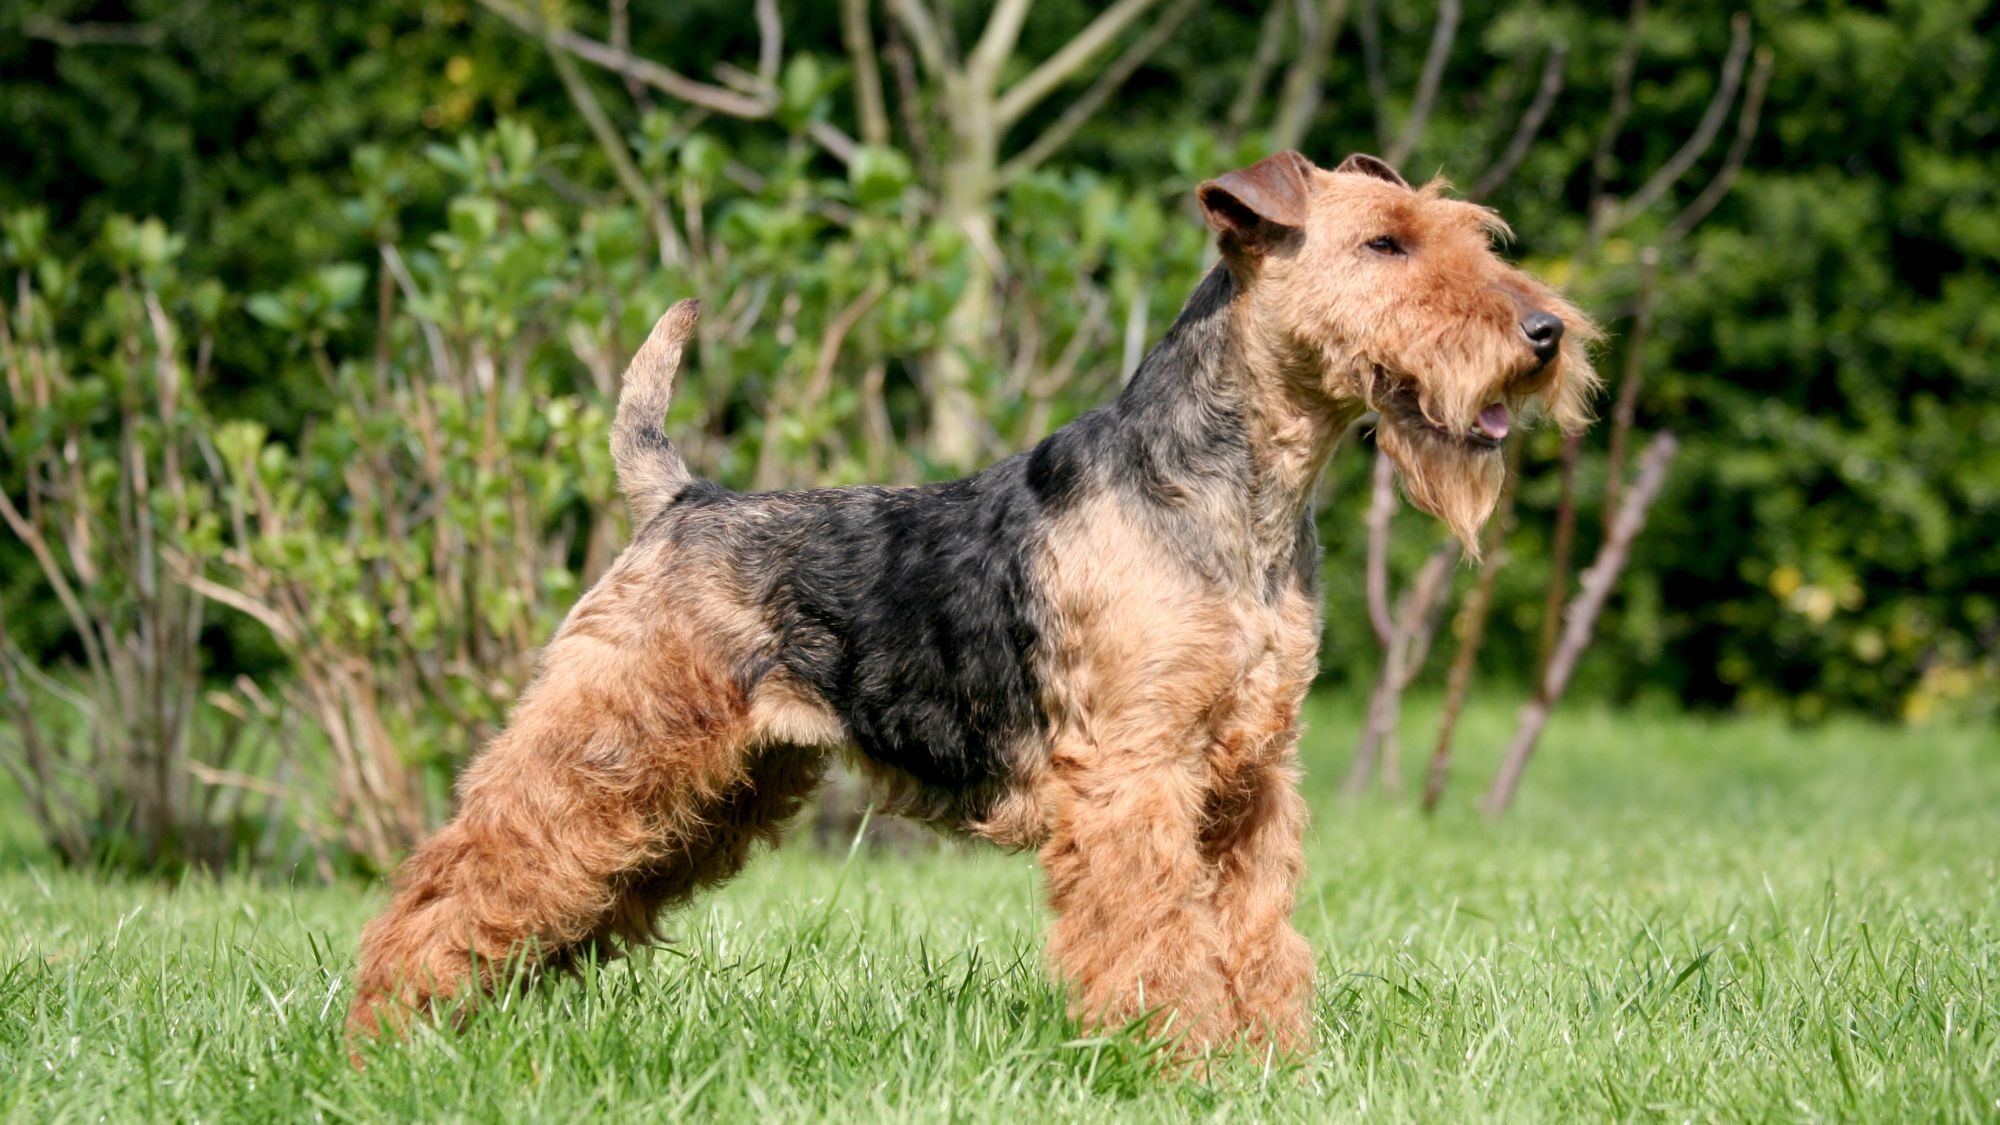 Side view of Welsh Terrier standing in grass